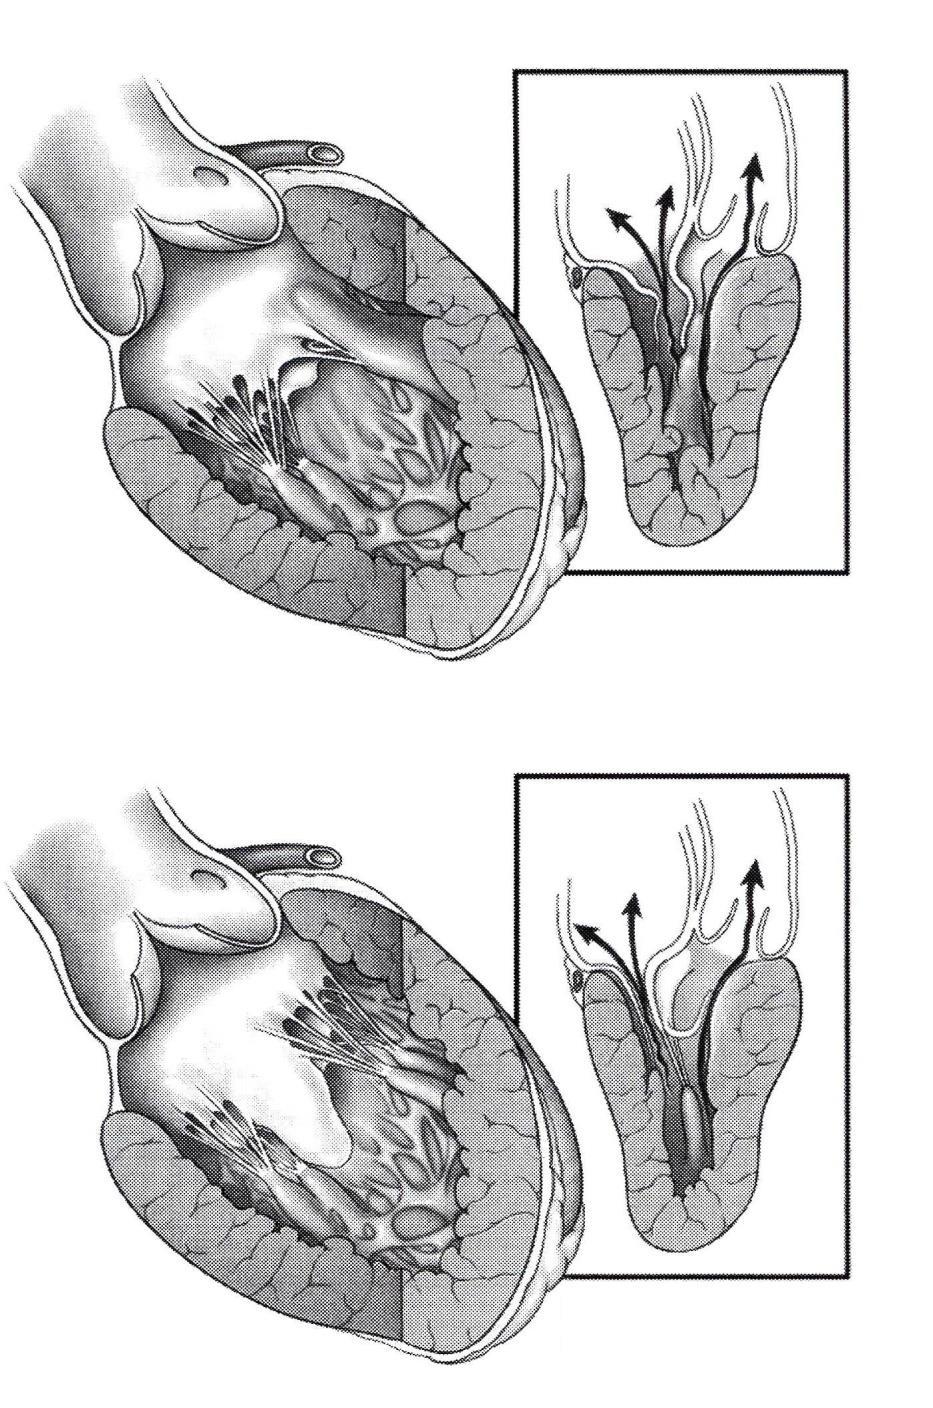 HOCM and mitral valve morphology Papillary muscle most common variant: large antero-medial